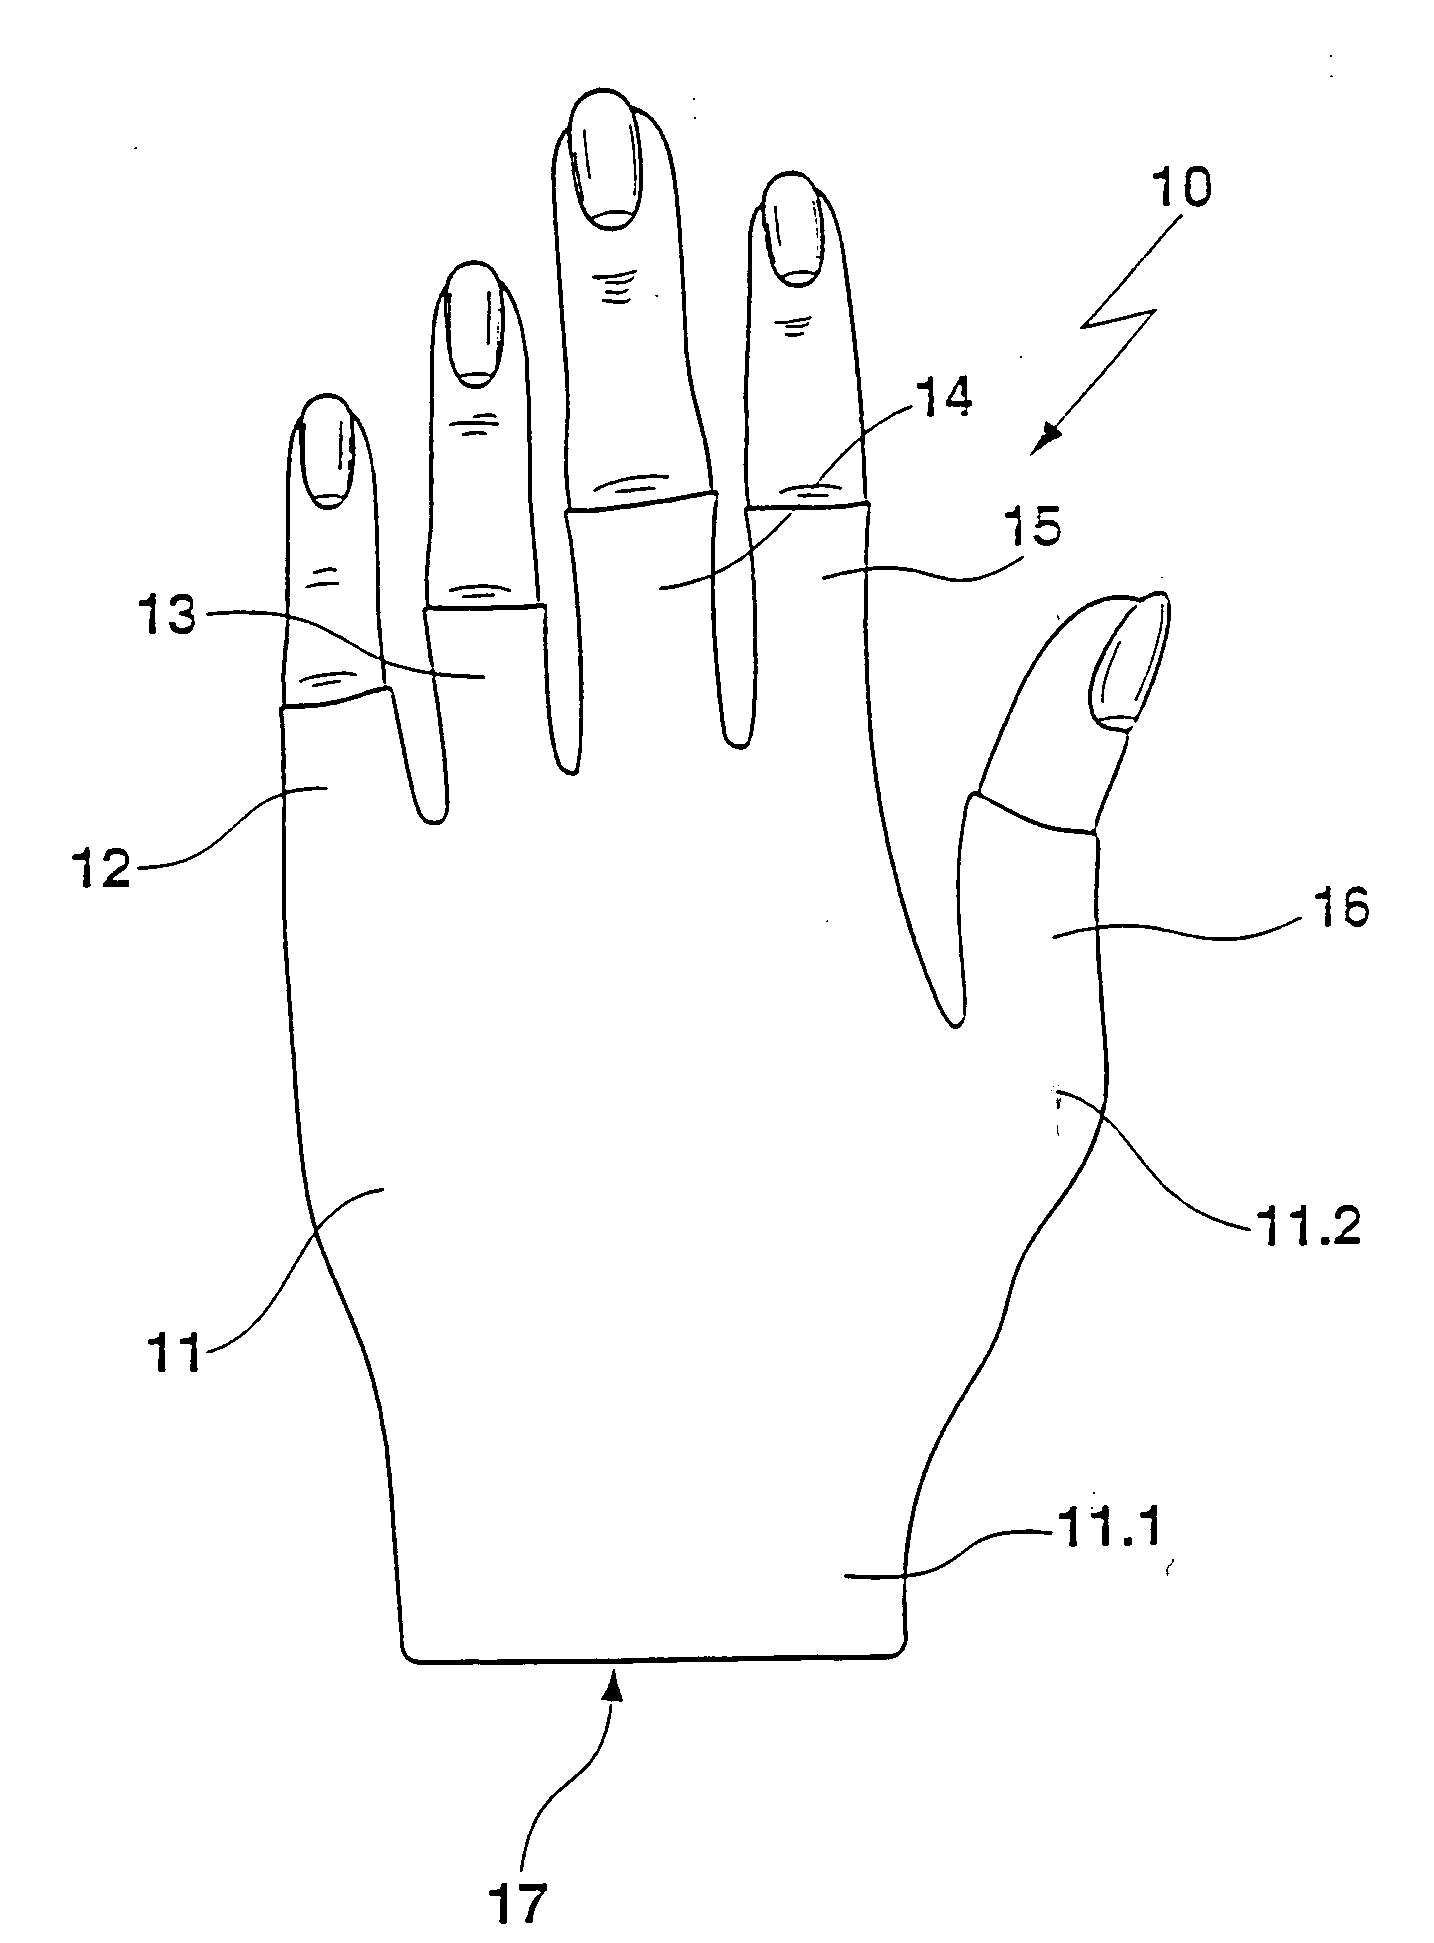 Knitted garment for the support and/or compression and/or compression therapy of parts of the body